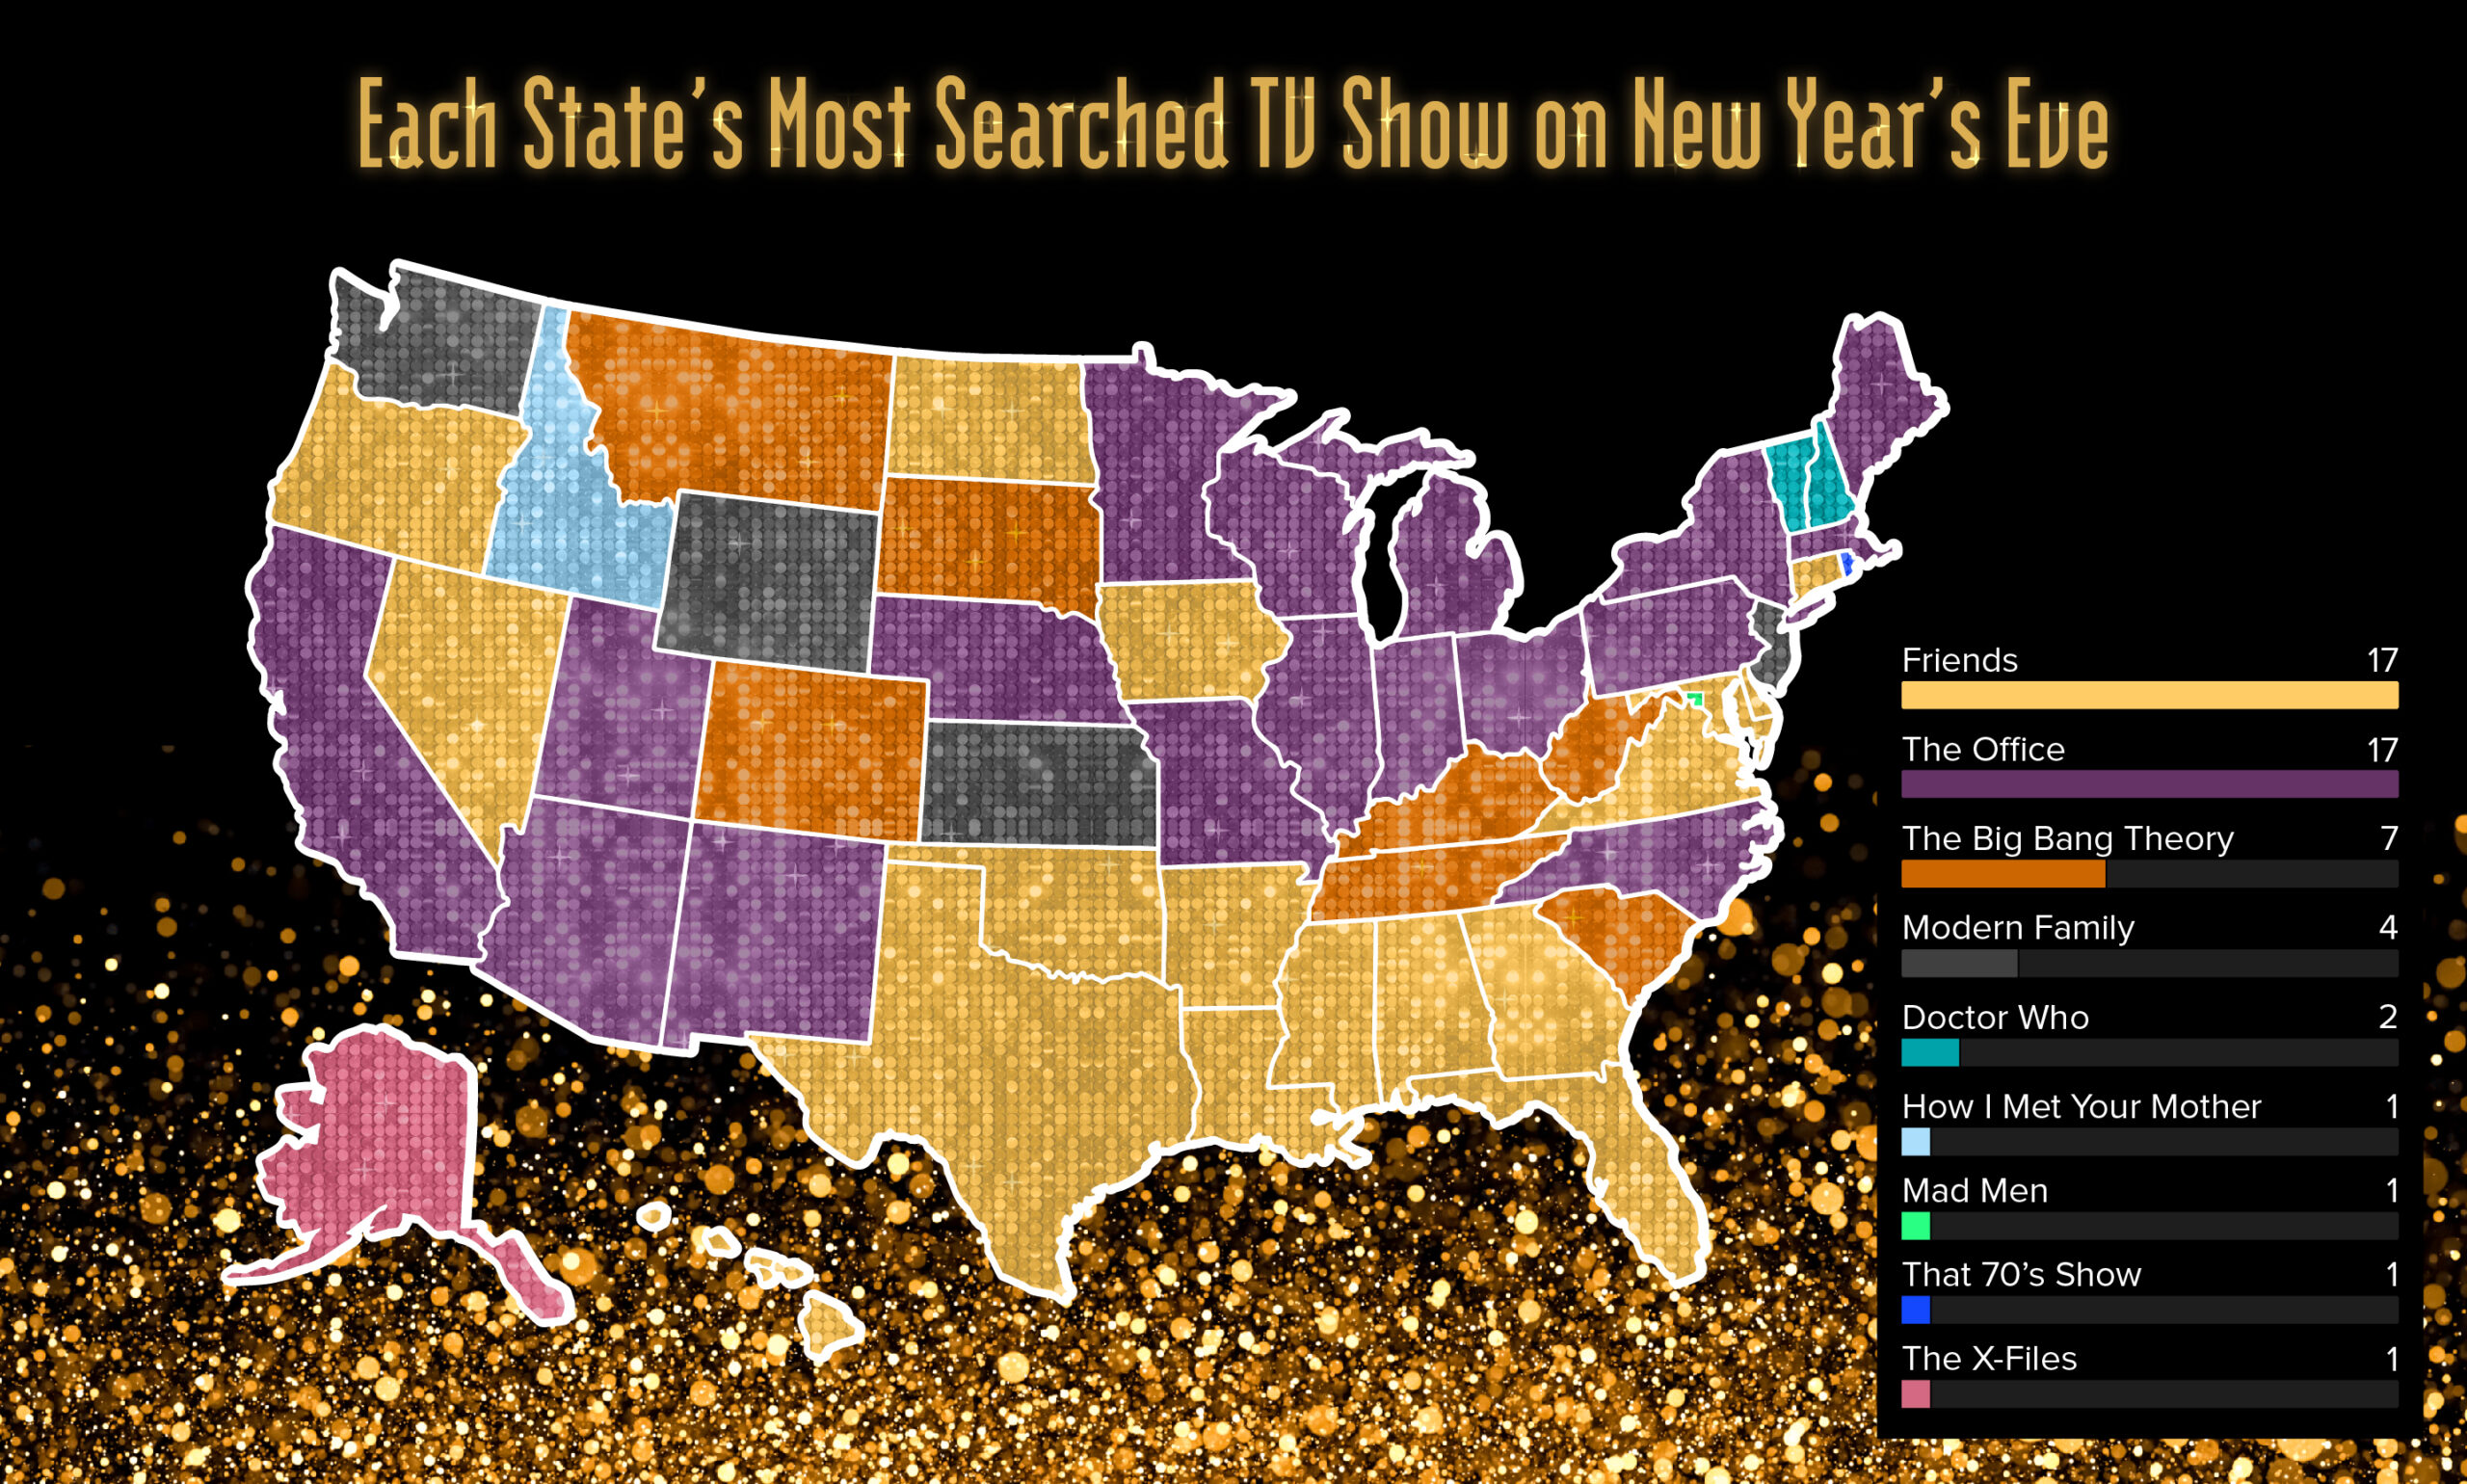 America's Most-Watched New Year’s Eve TV Episodes